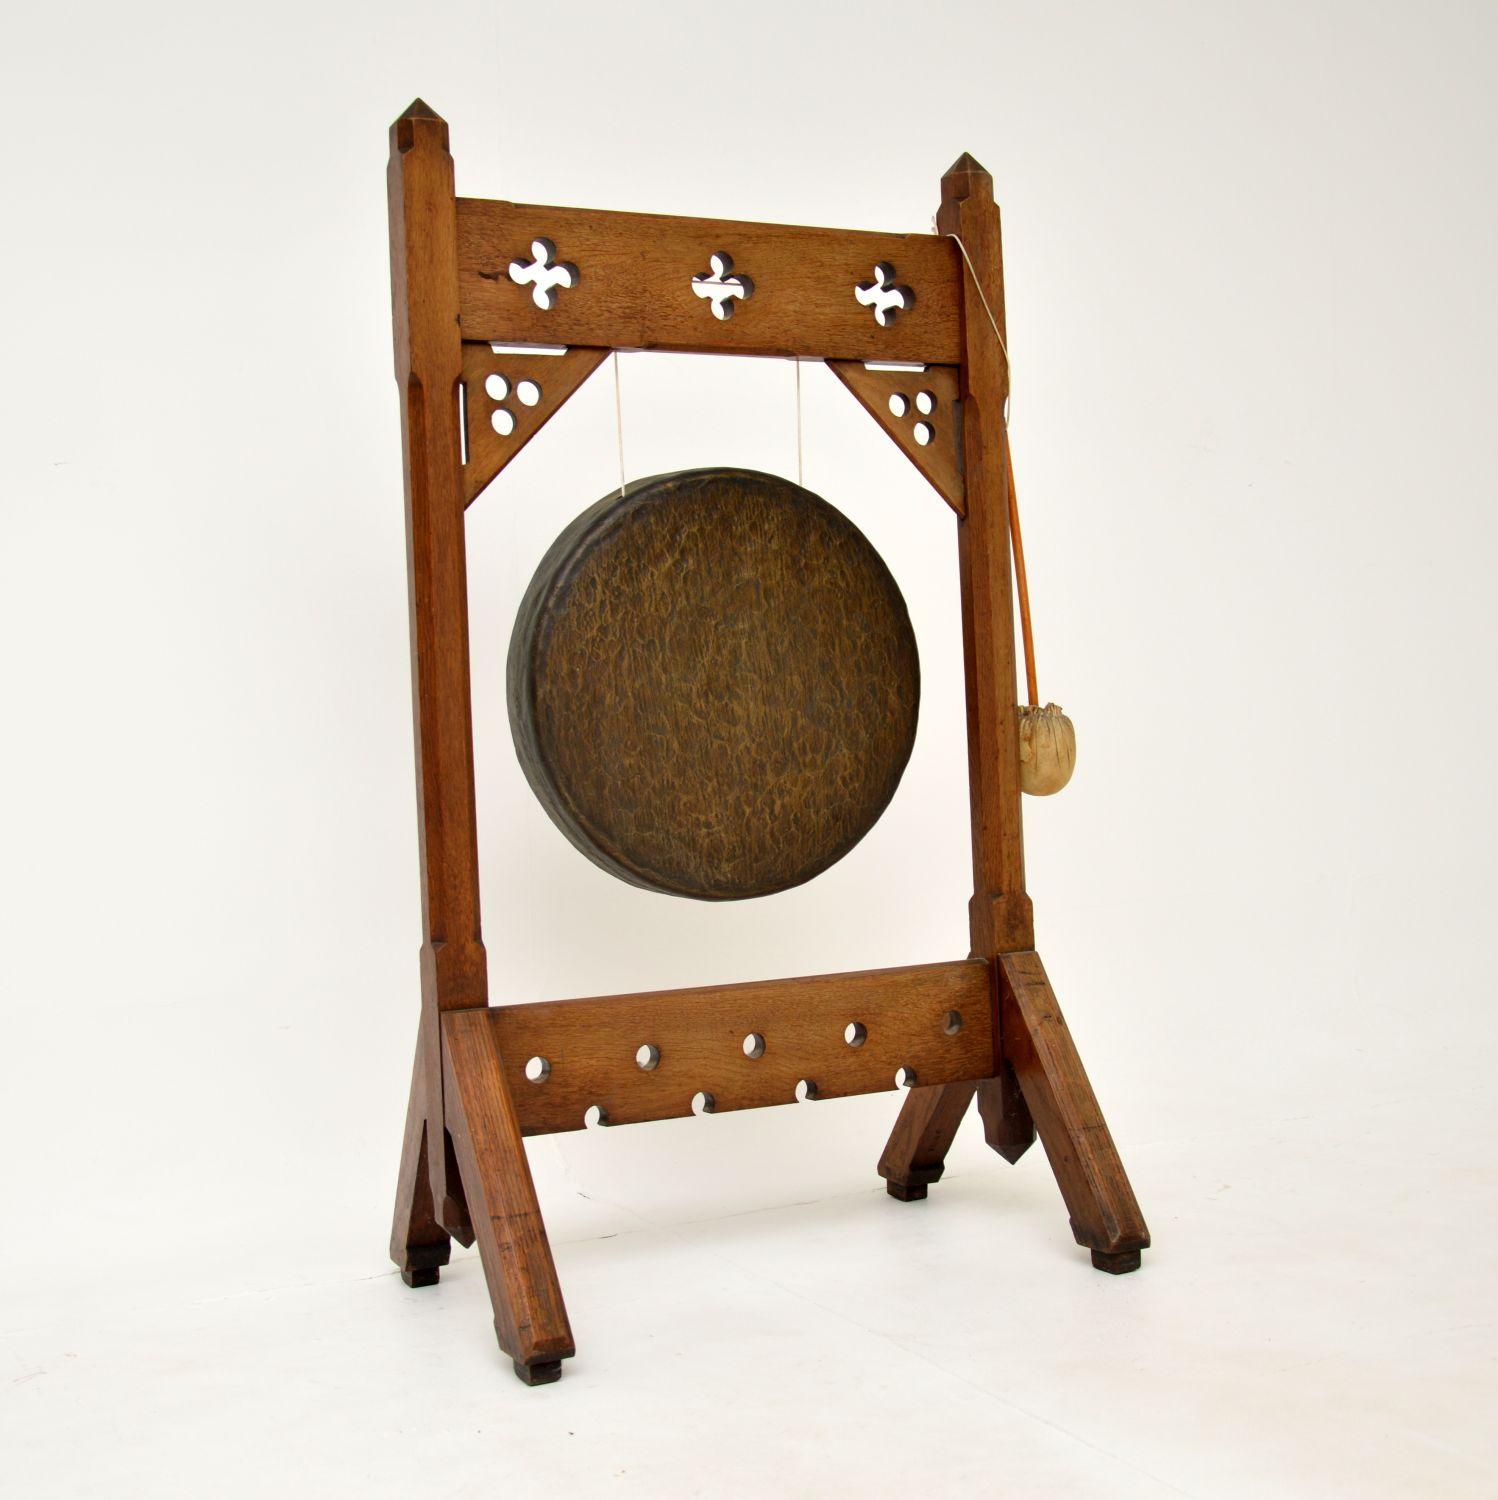 A wonderful antique Gothic Style Victorian Arts & Crafts period dinner gong in solid oak. This was made in England, it dates from around 1880-1890.

It is quite large and very impressive, it makes a lovely sound when beaten. This is from the Arts